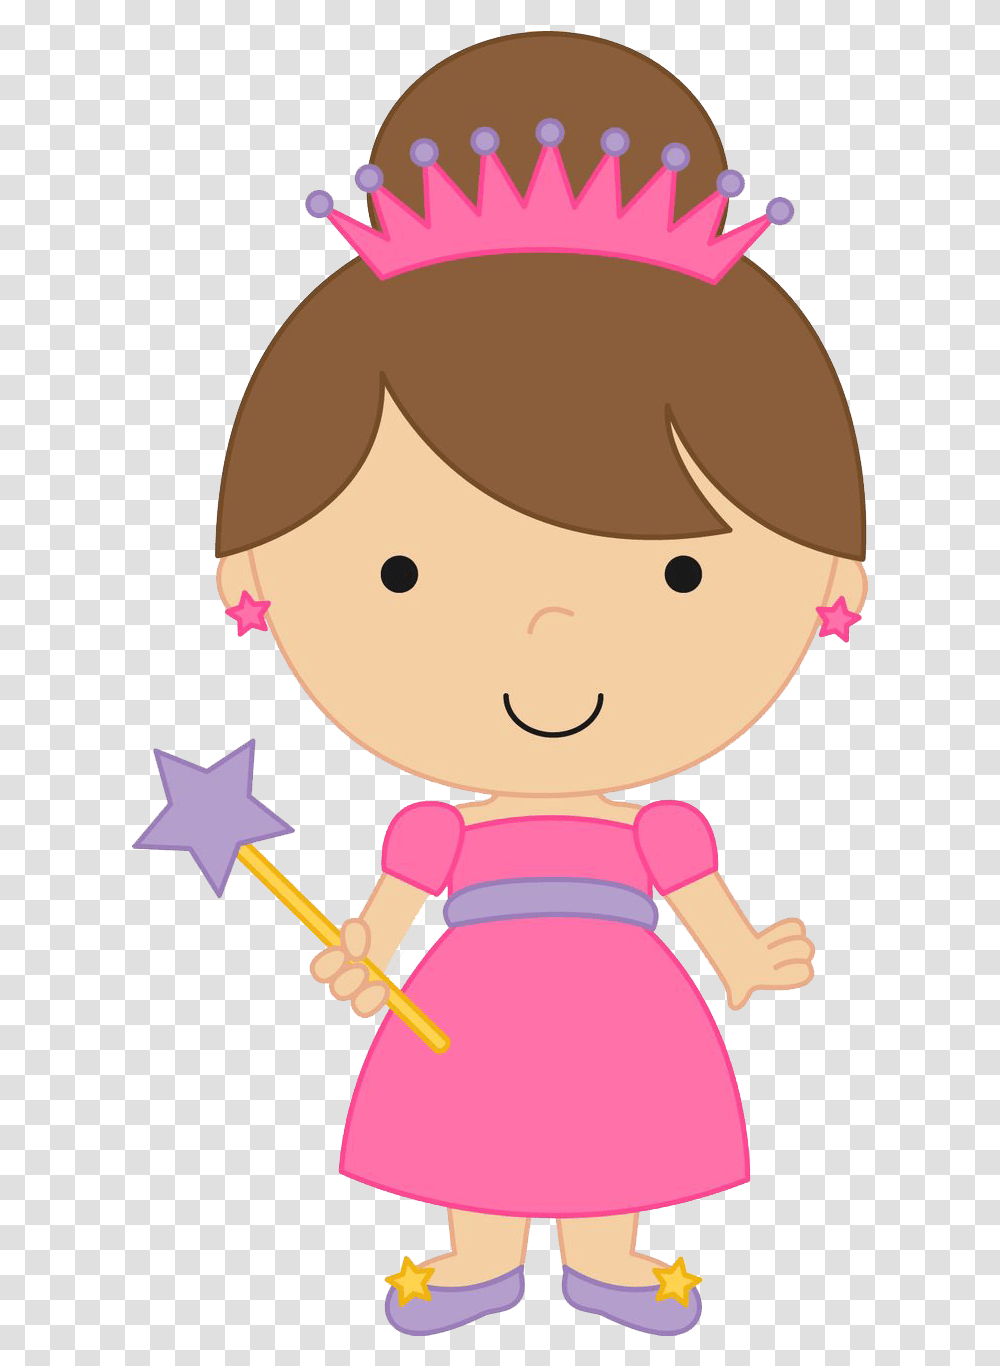 Download Fairytale Picture Hq Image Princess Clipart, Toy, Wand, Doll Transparent Png